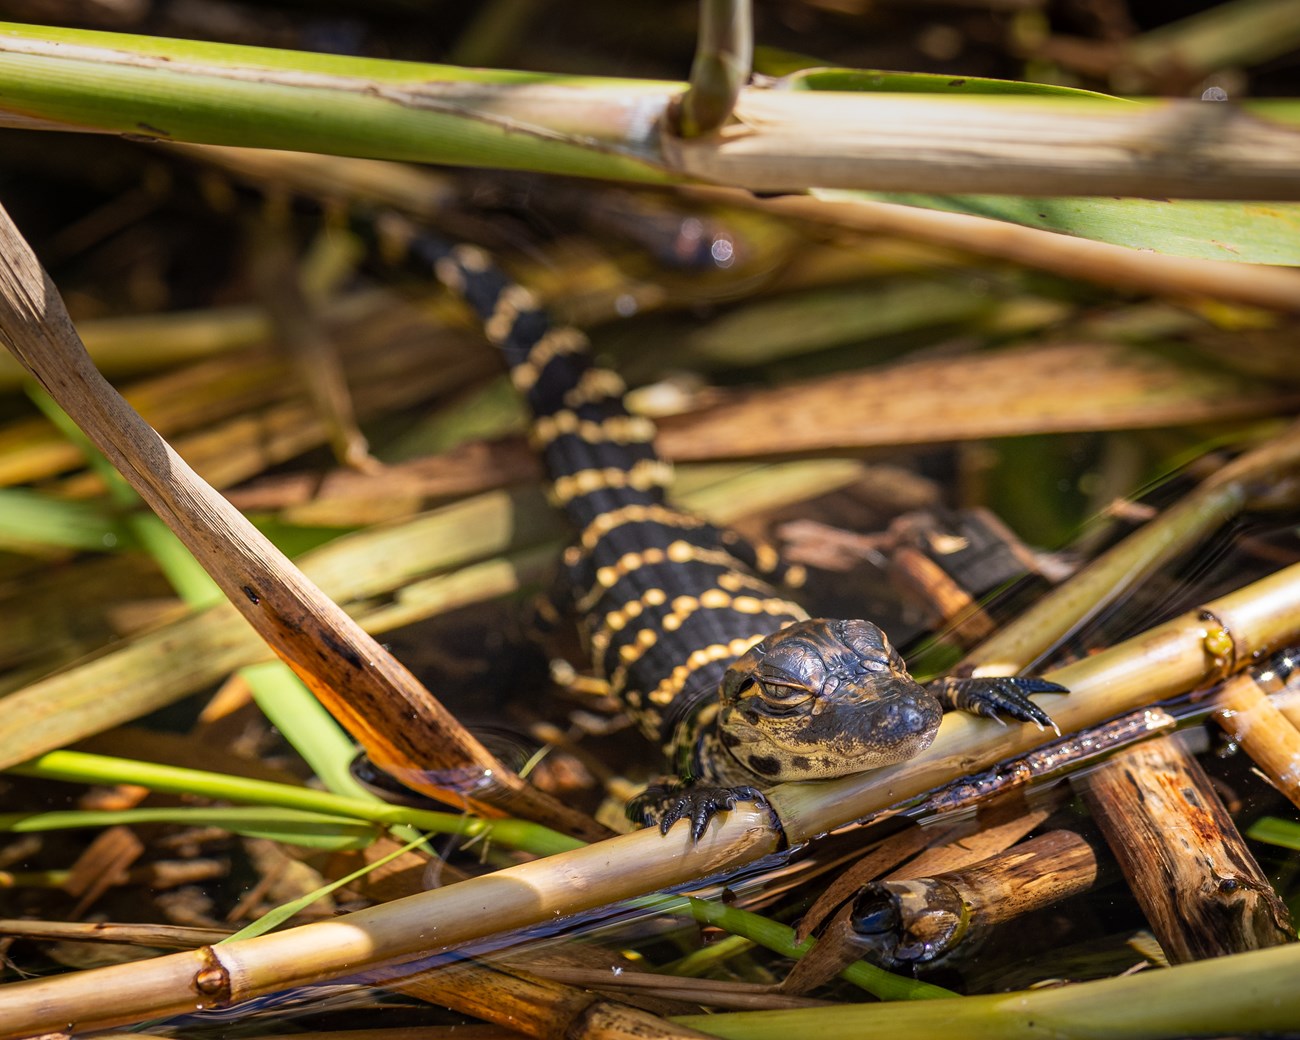 A close-up of a baby alligator with yellowish and dark colored stripes running along its back, laying on a pile of mixed vegetation.